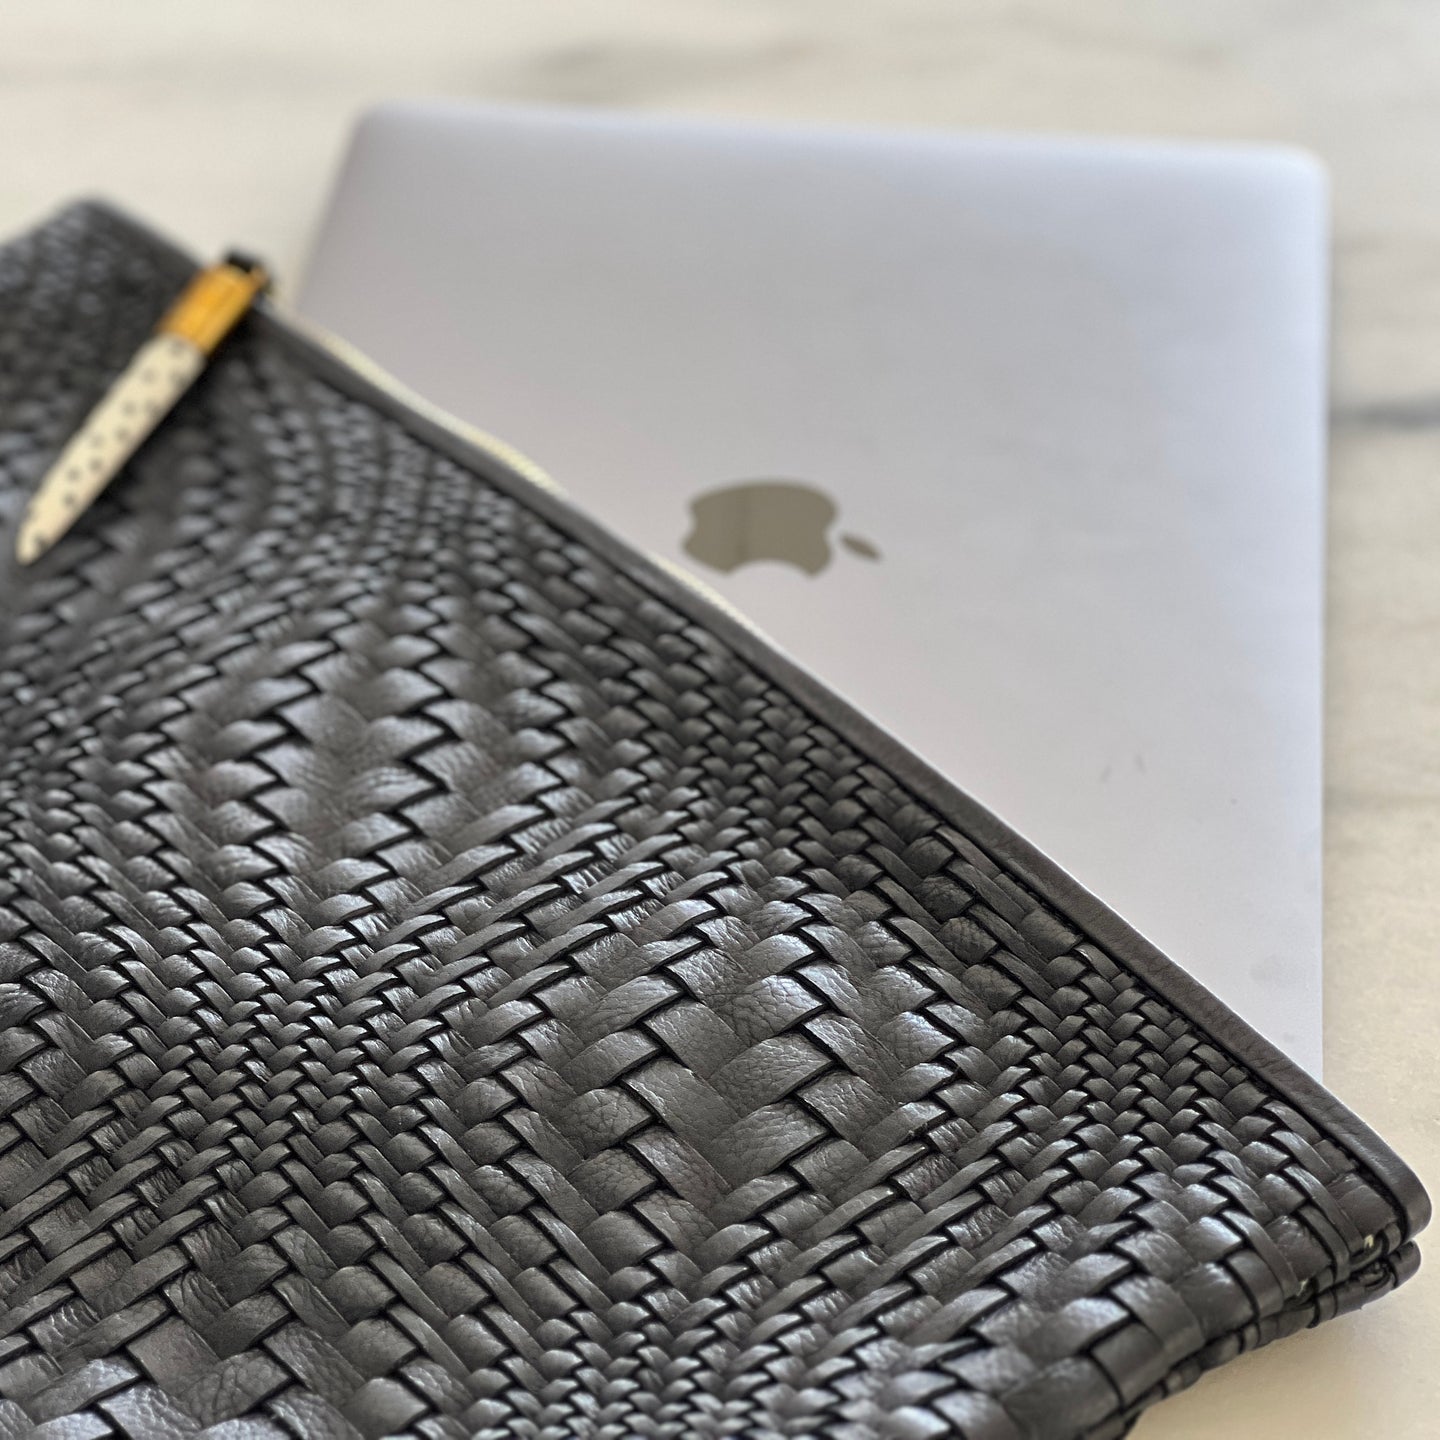 LUXE LAPTOP CASES